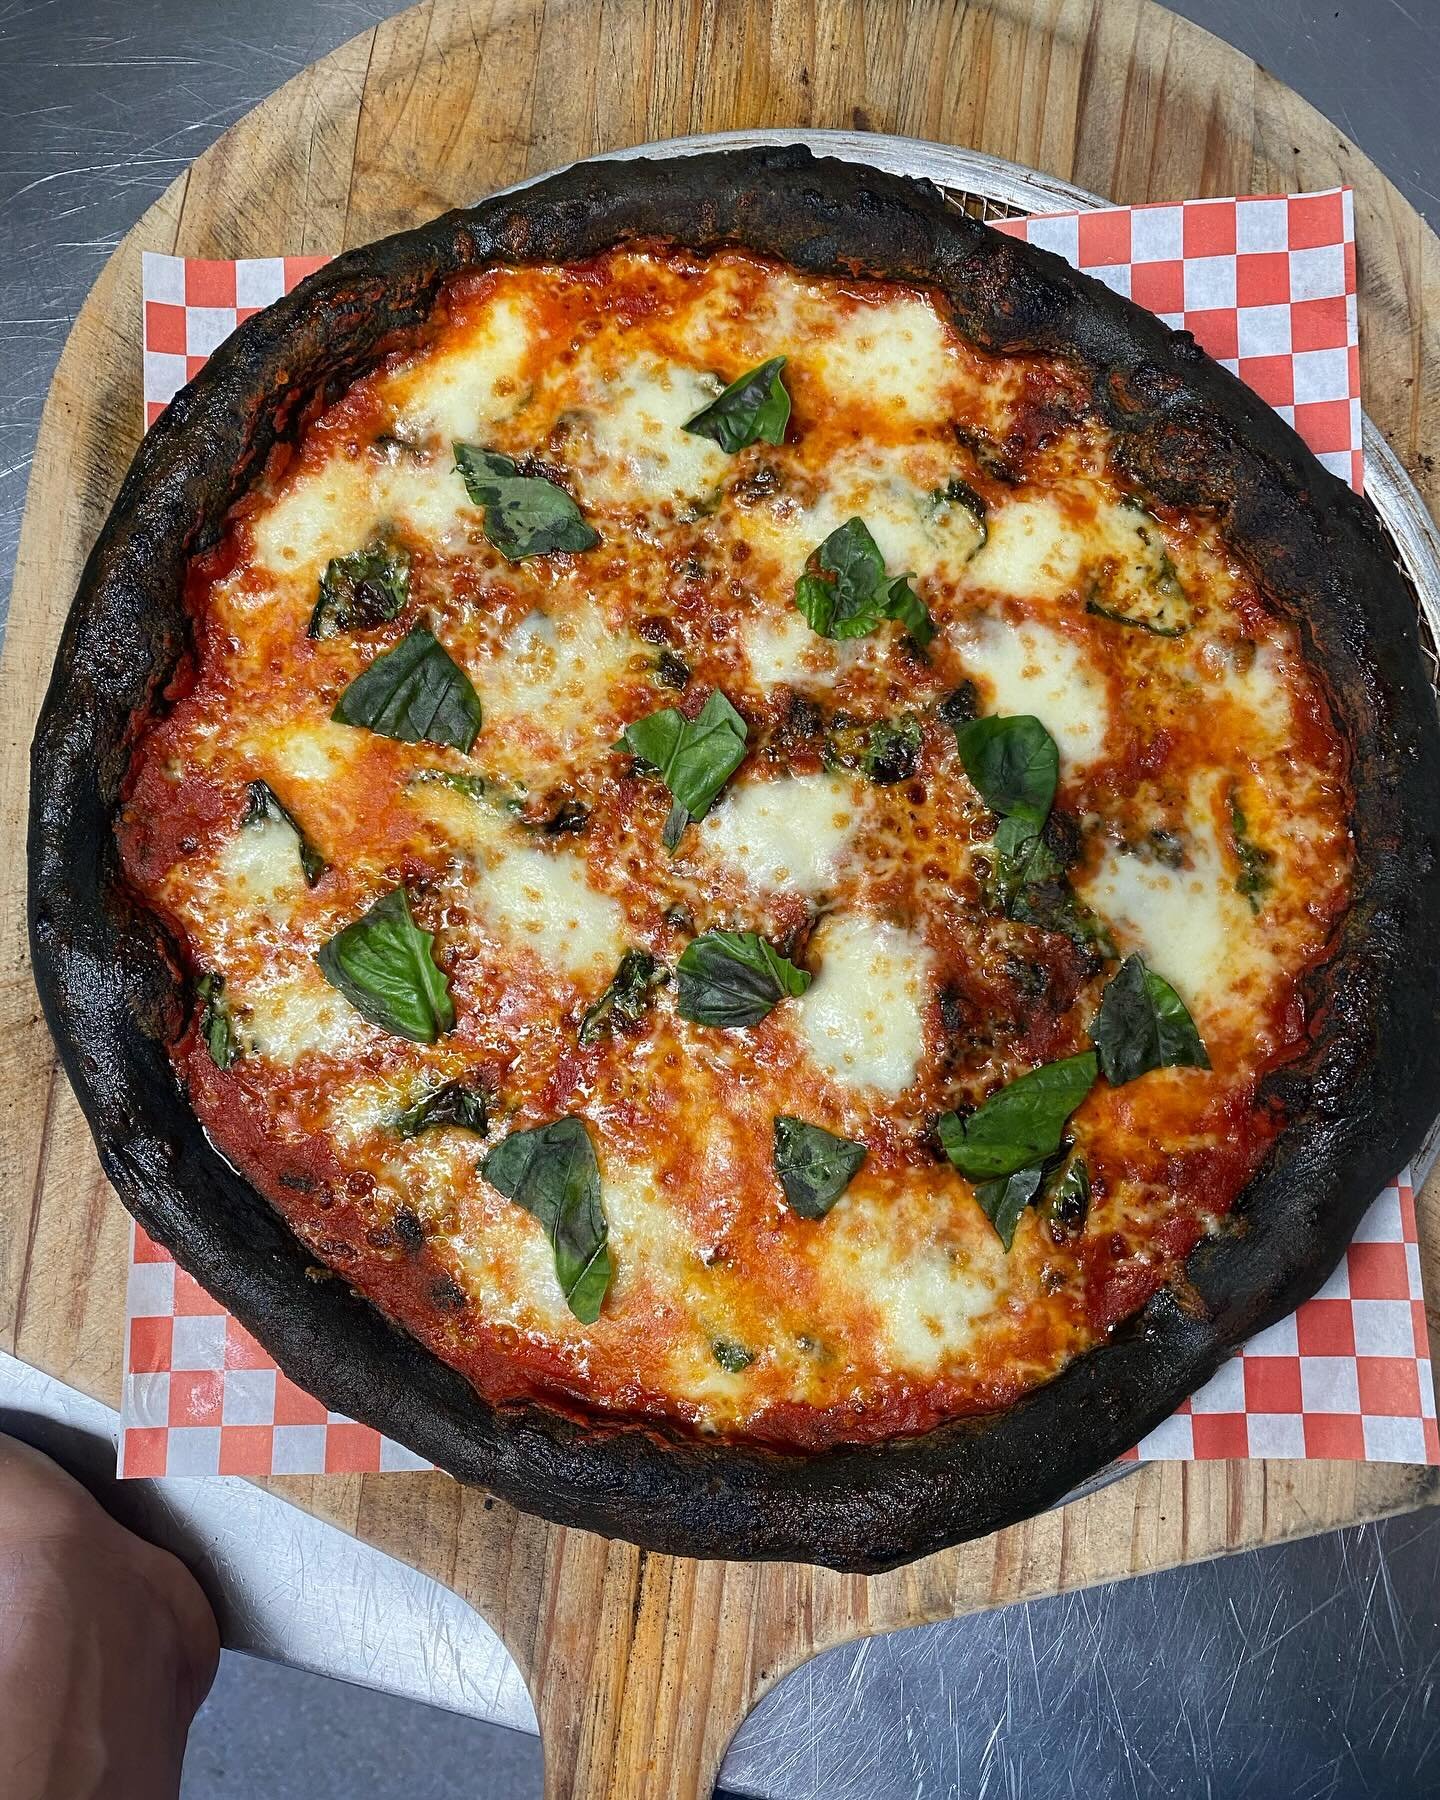 May the 4th be with you! 
Darth Marg - limited special for today at the shop 
Charcoal infused dough, tomato, mozzarella, basil 
Come to the dark side.